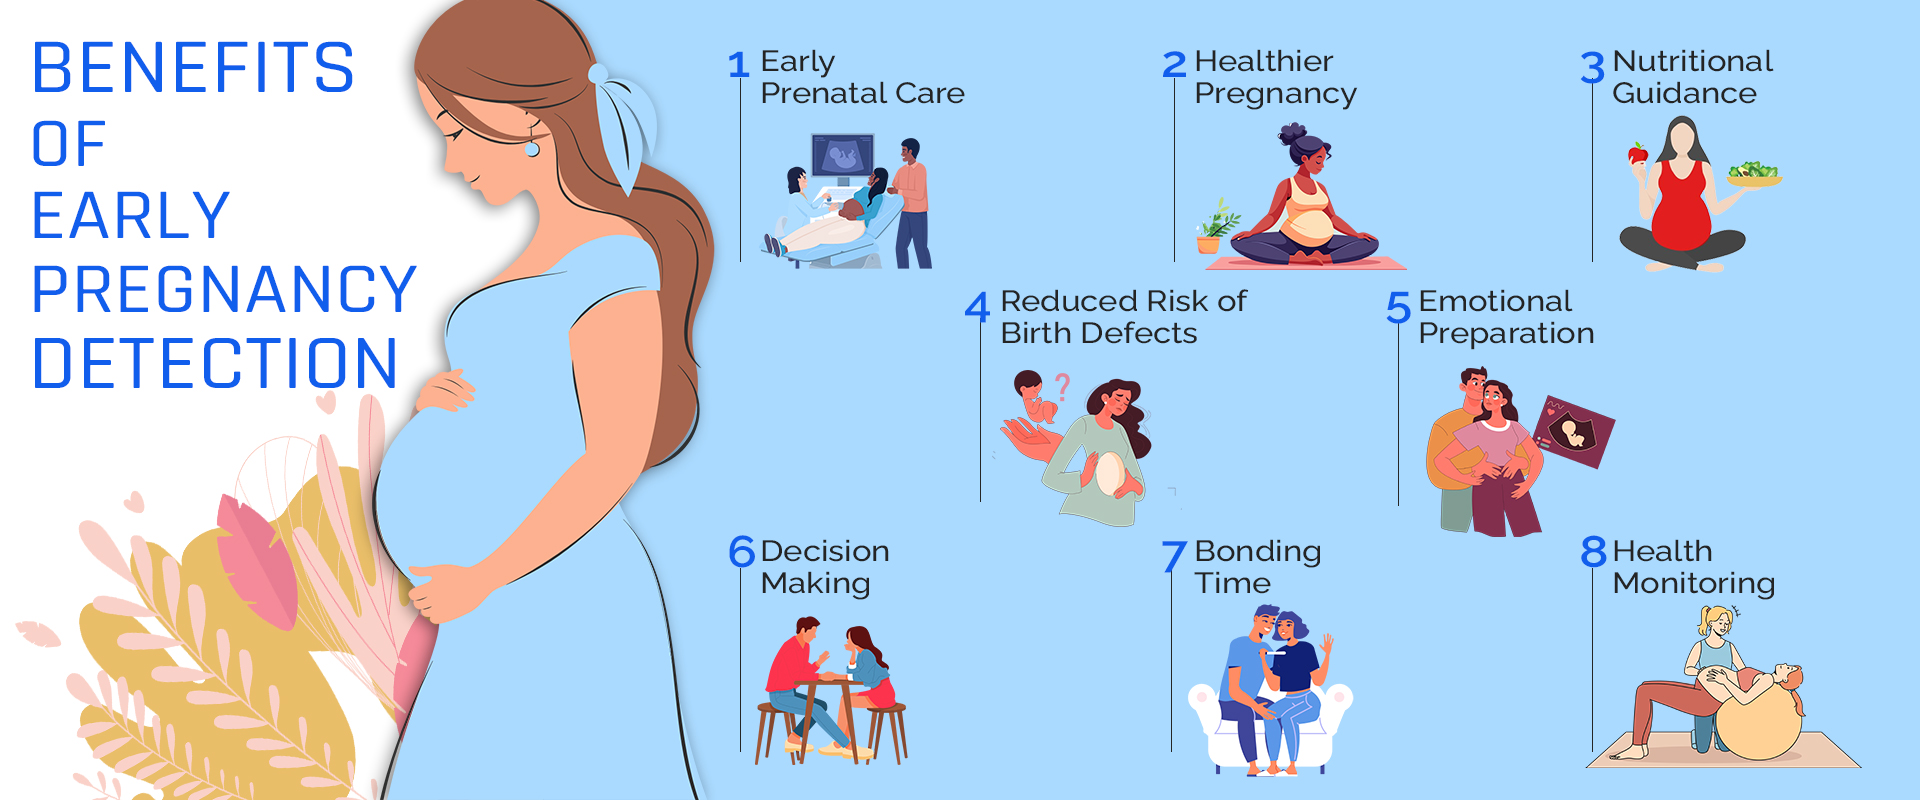 Benefits of Early Pregnancy Detection